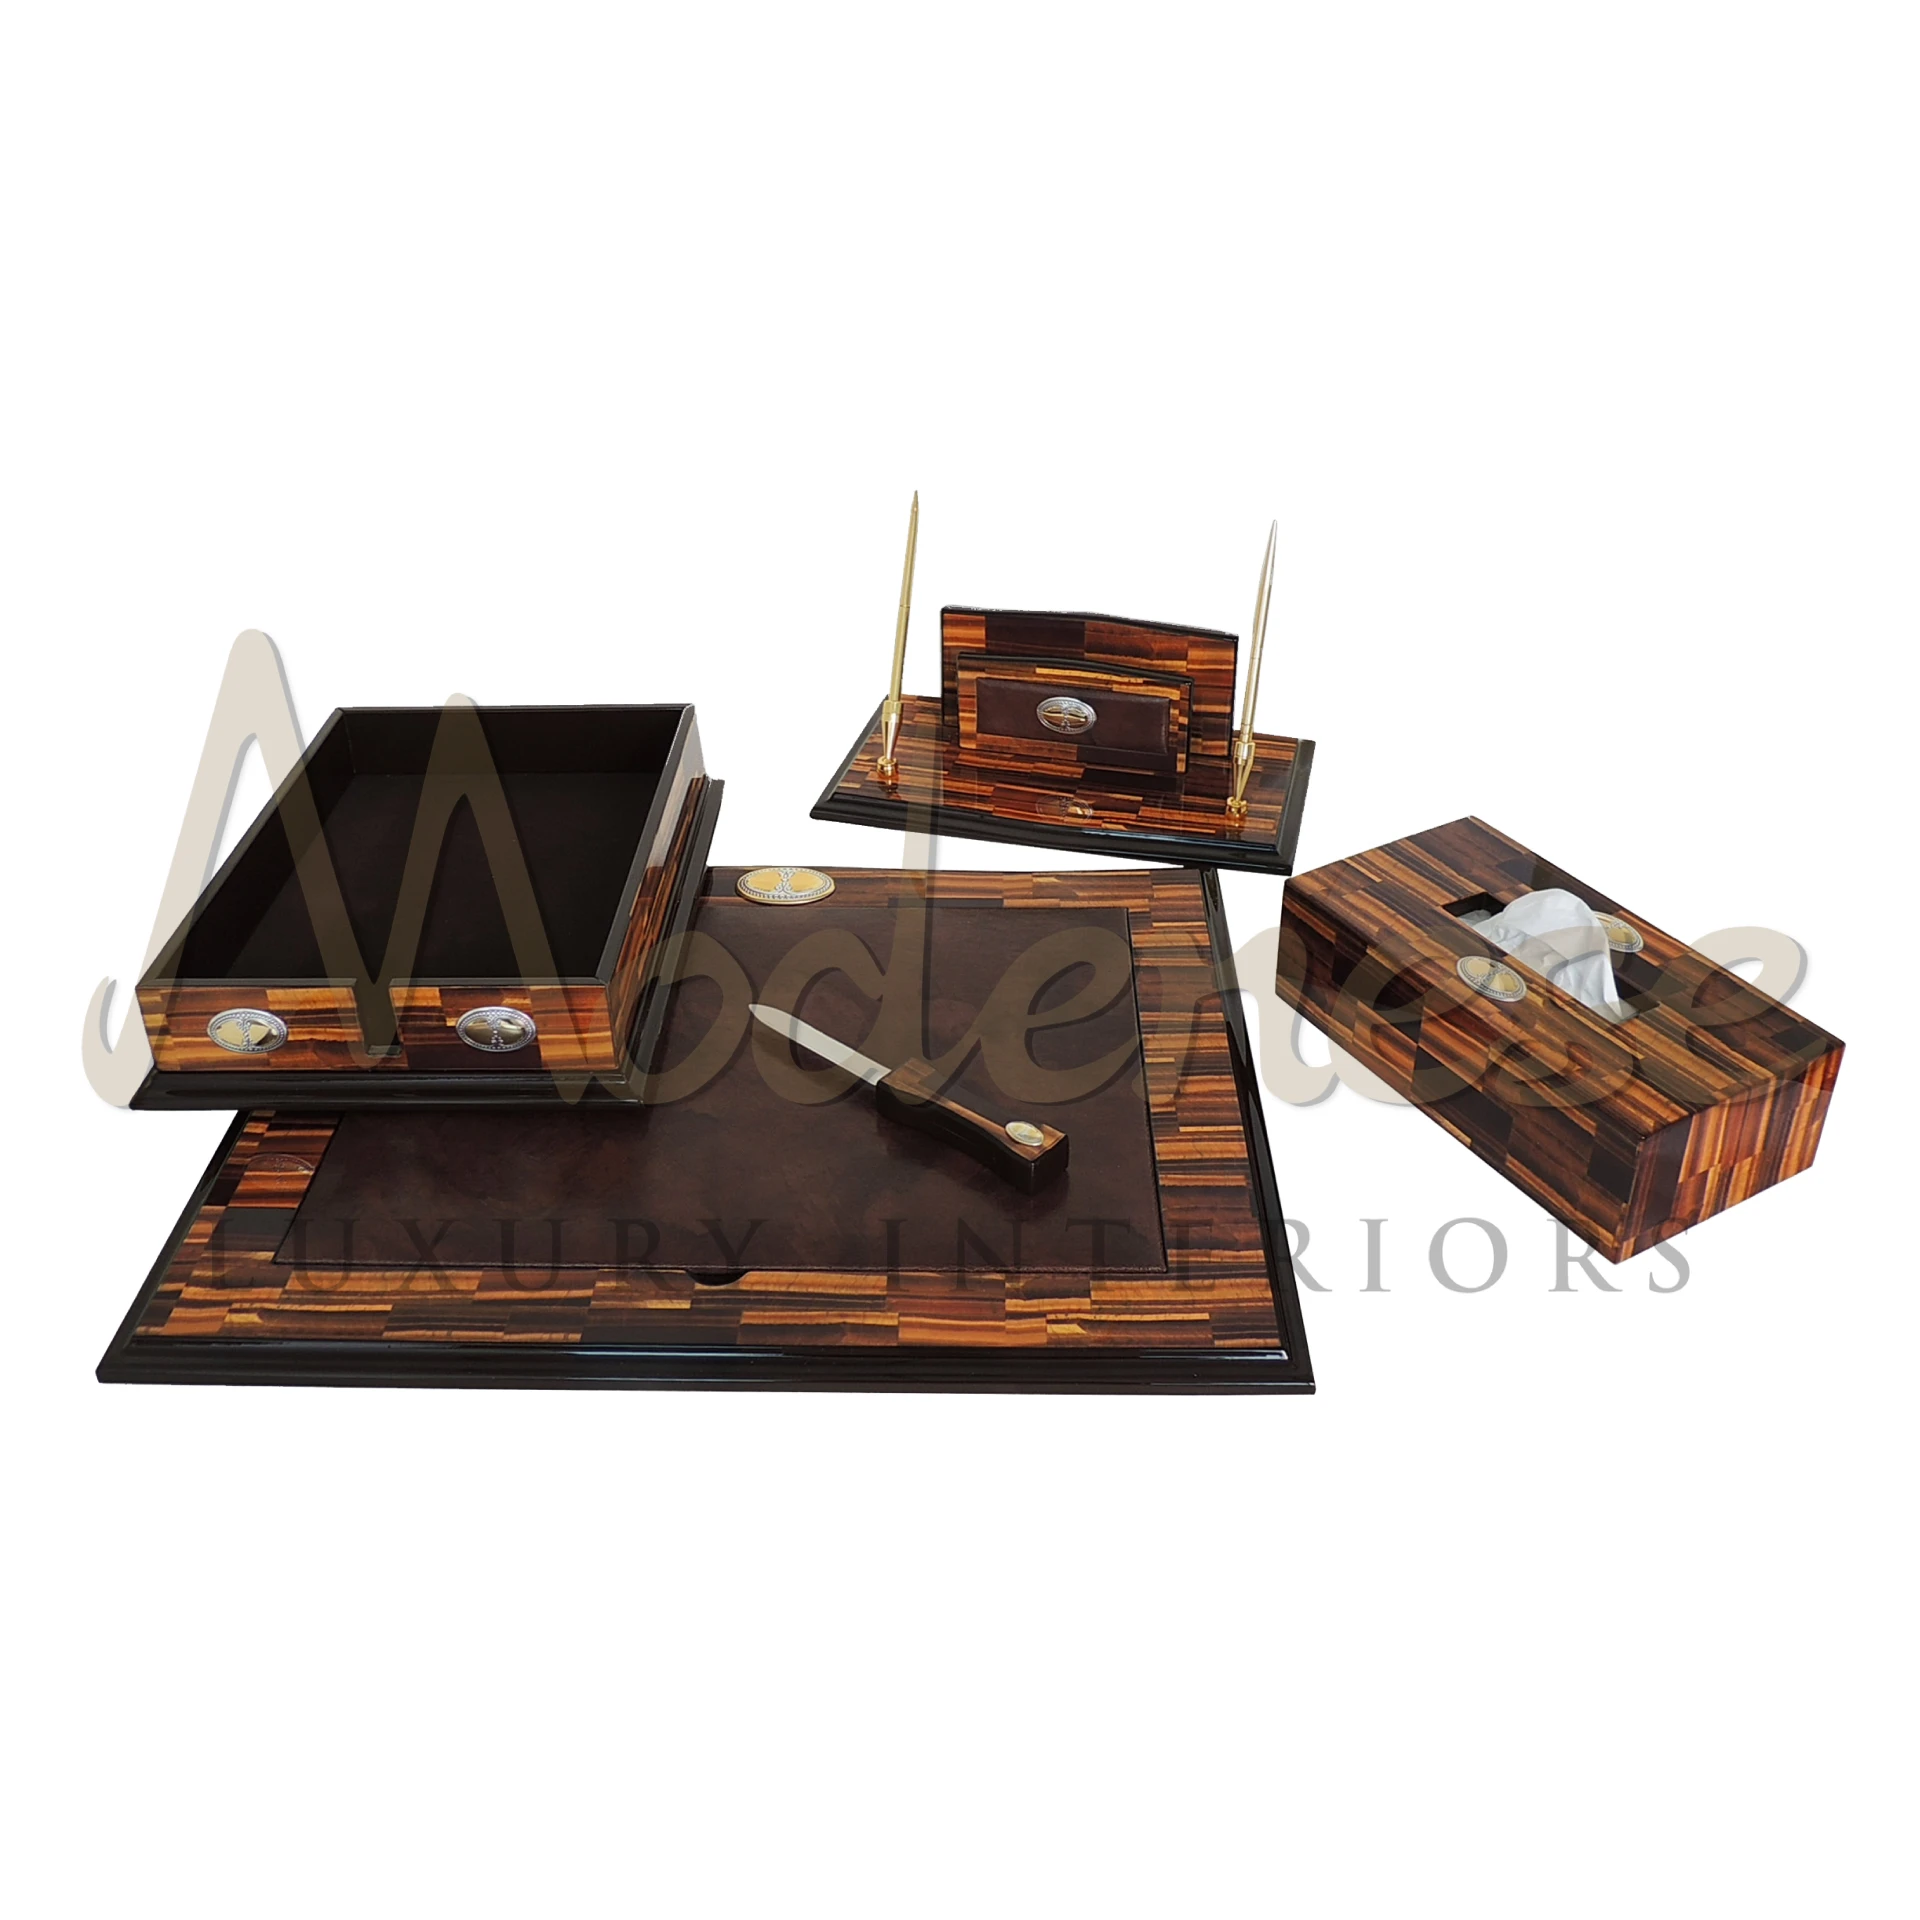 Dark Brown Writing Desk Set, with elegant writing instruments and accessories in rich wood finish, offering a cohesive, stylish workspace solution.






